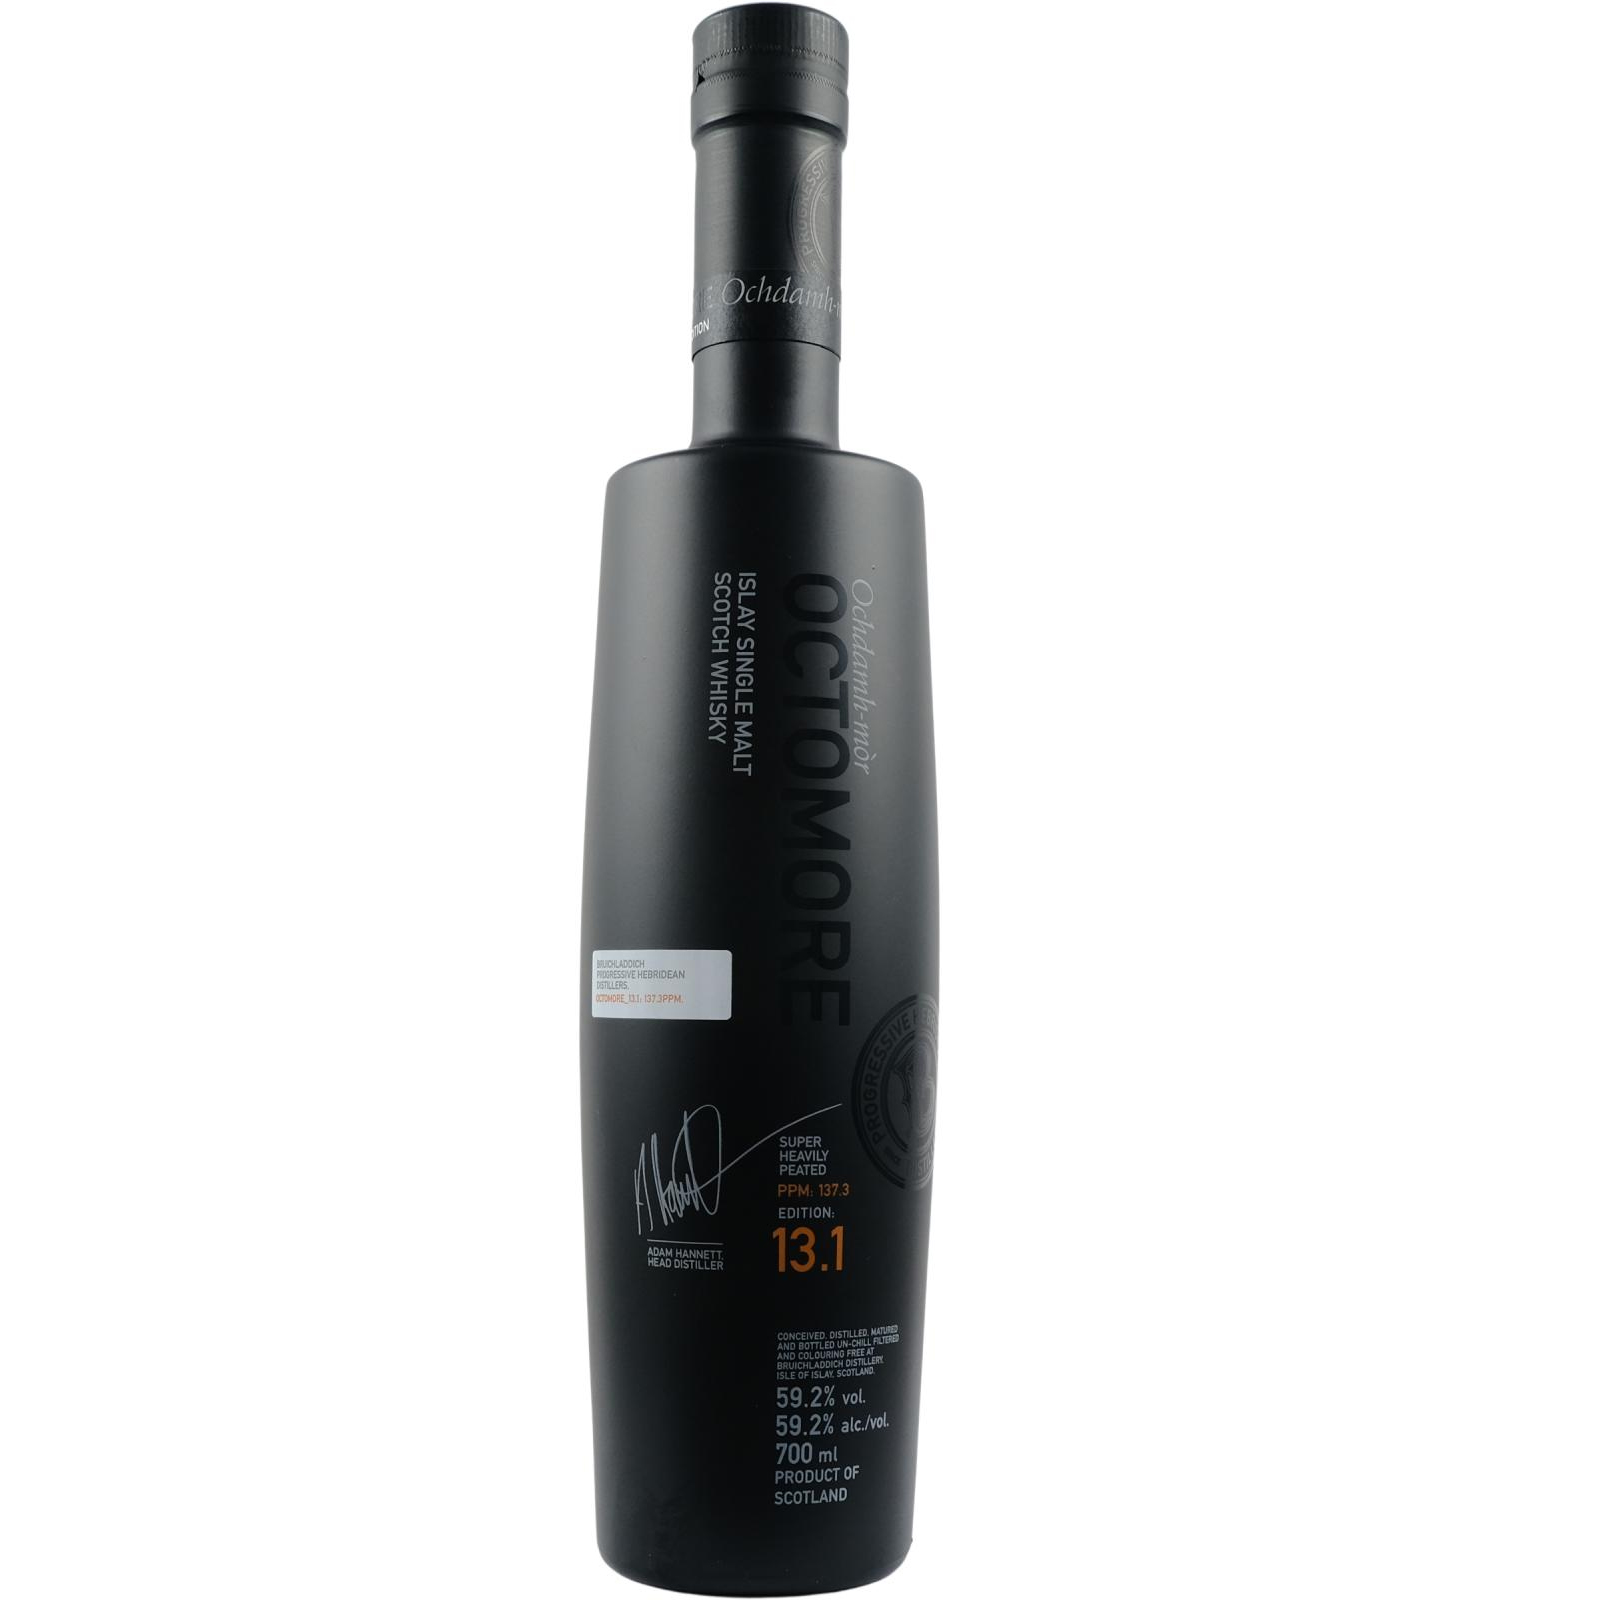 You are currently viewing Octomore 13.1